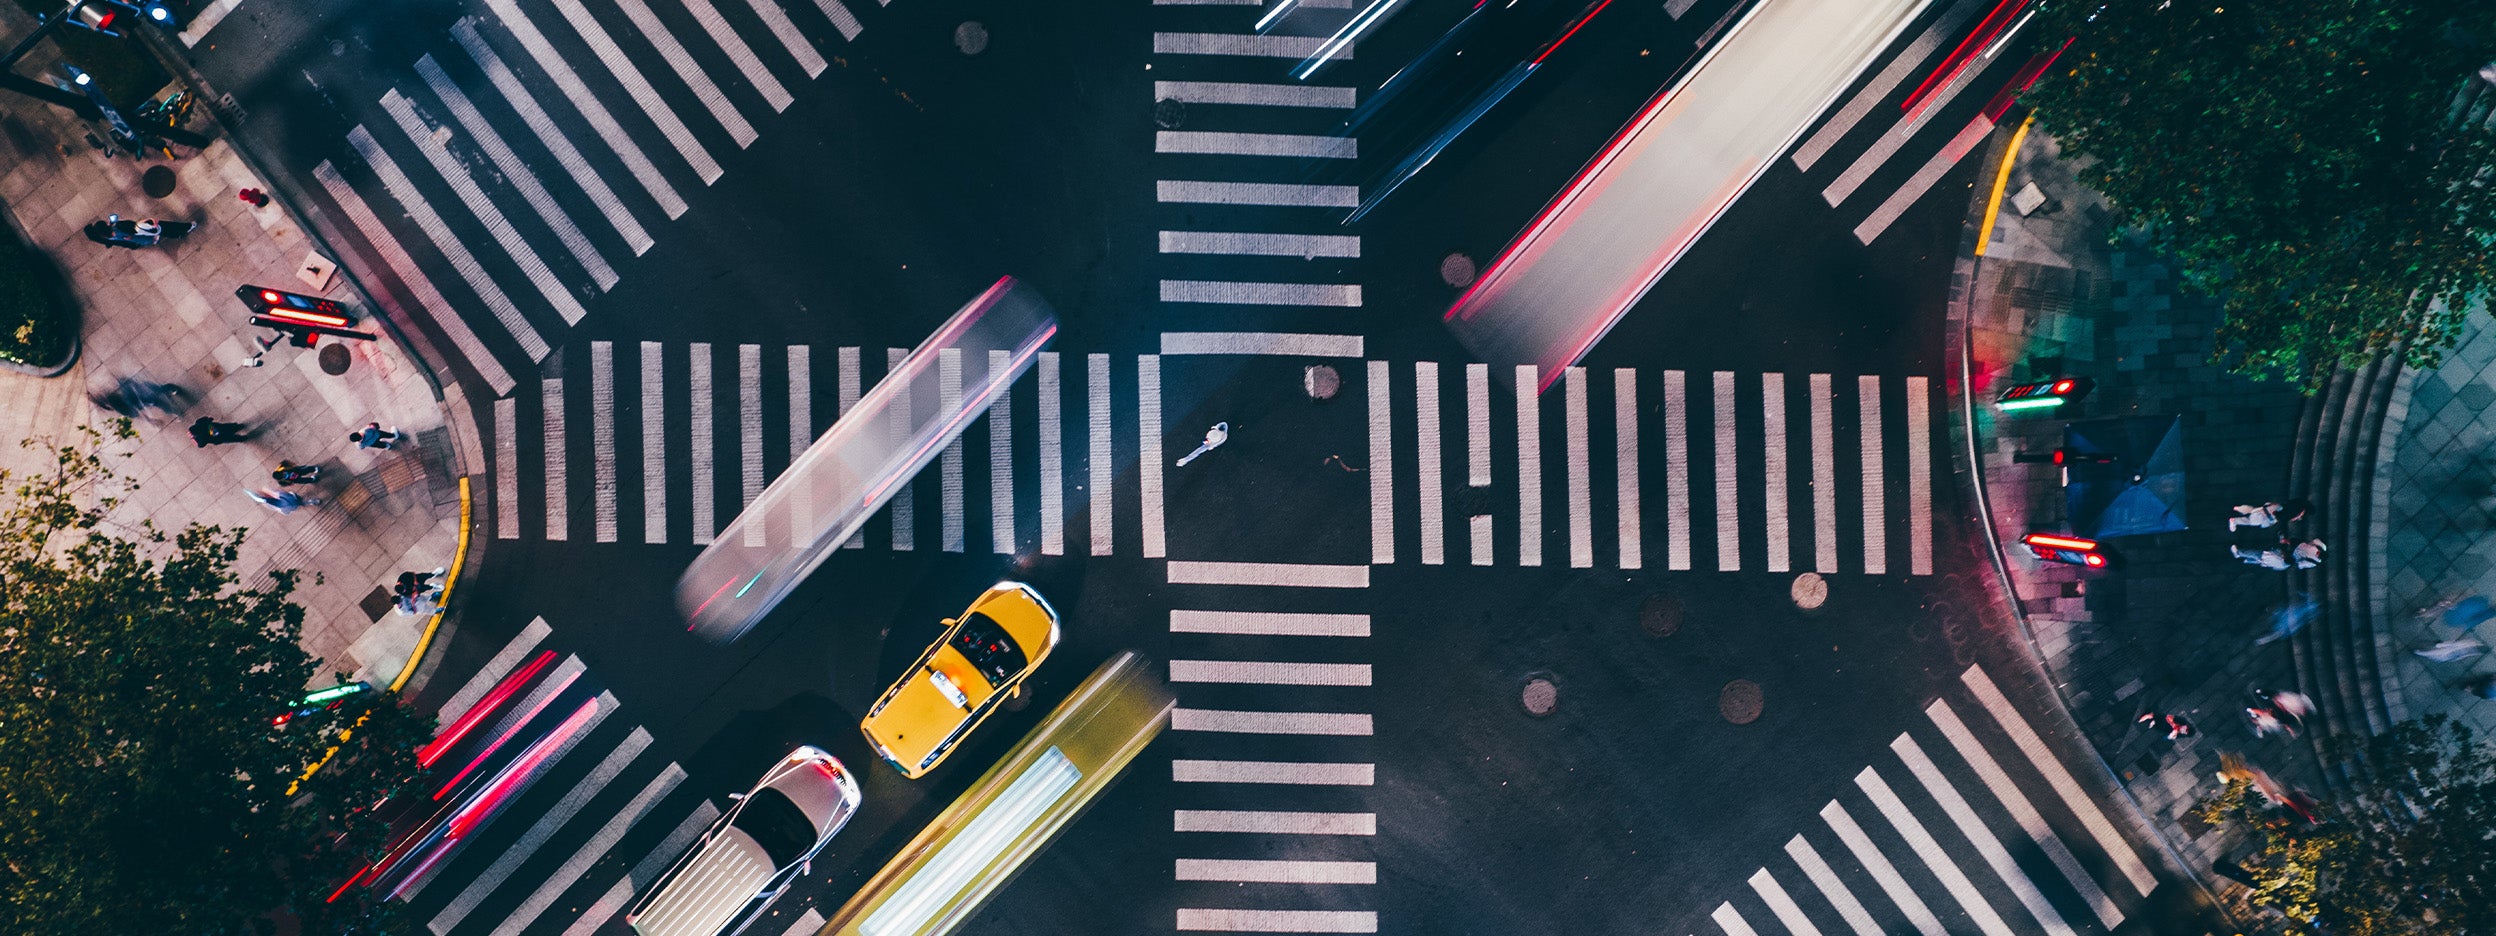 Cars at a crosswalk - view from above